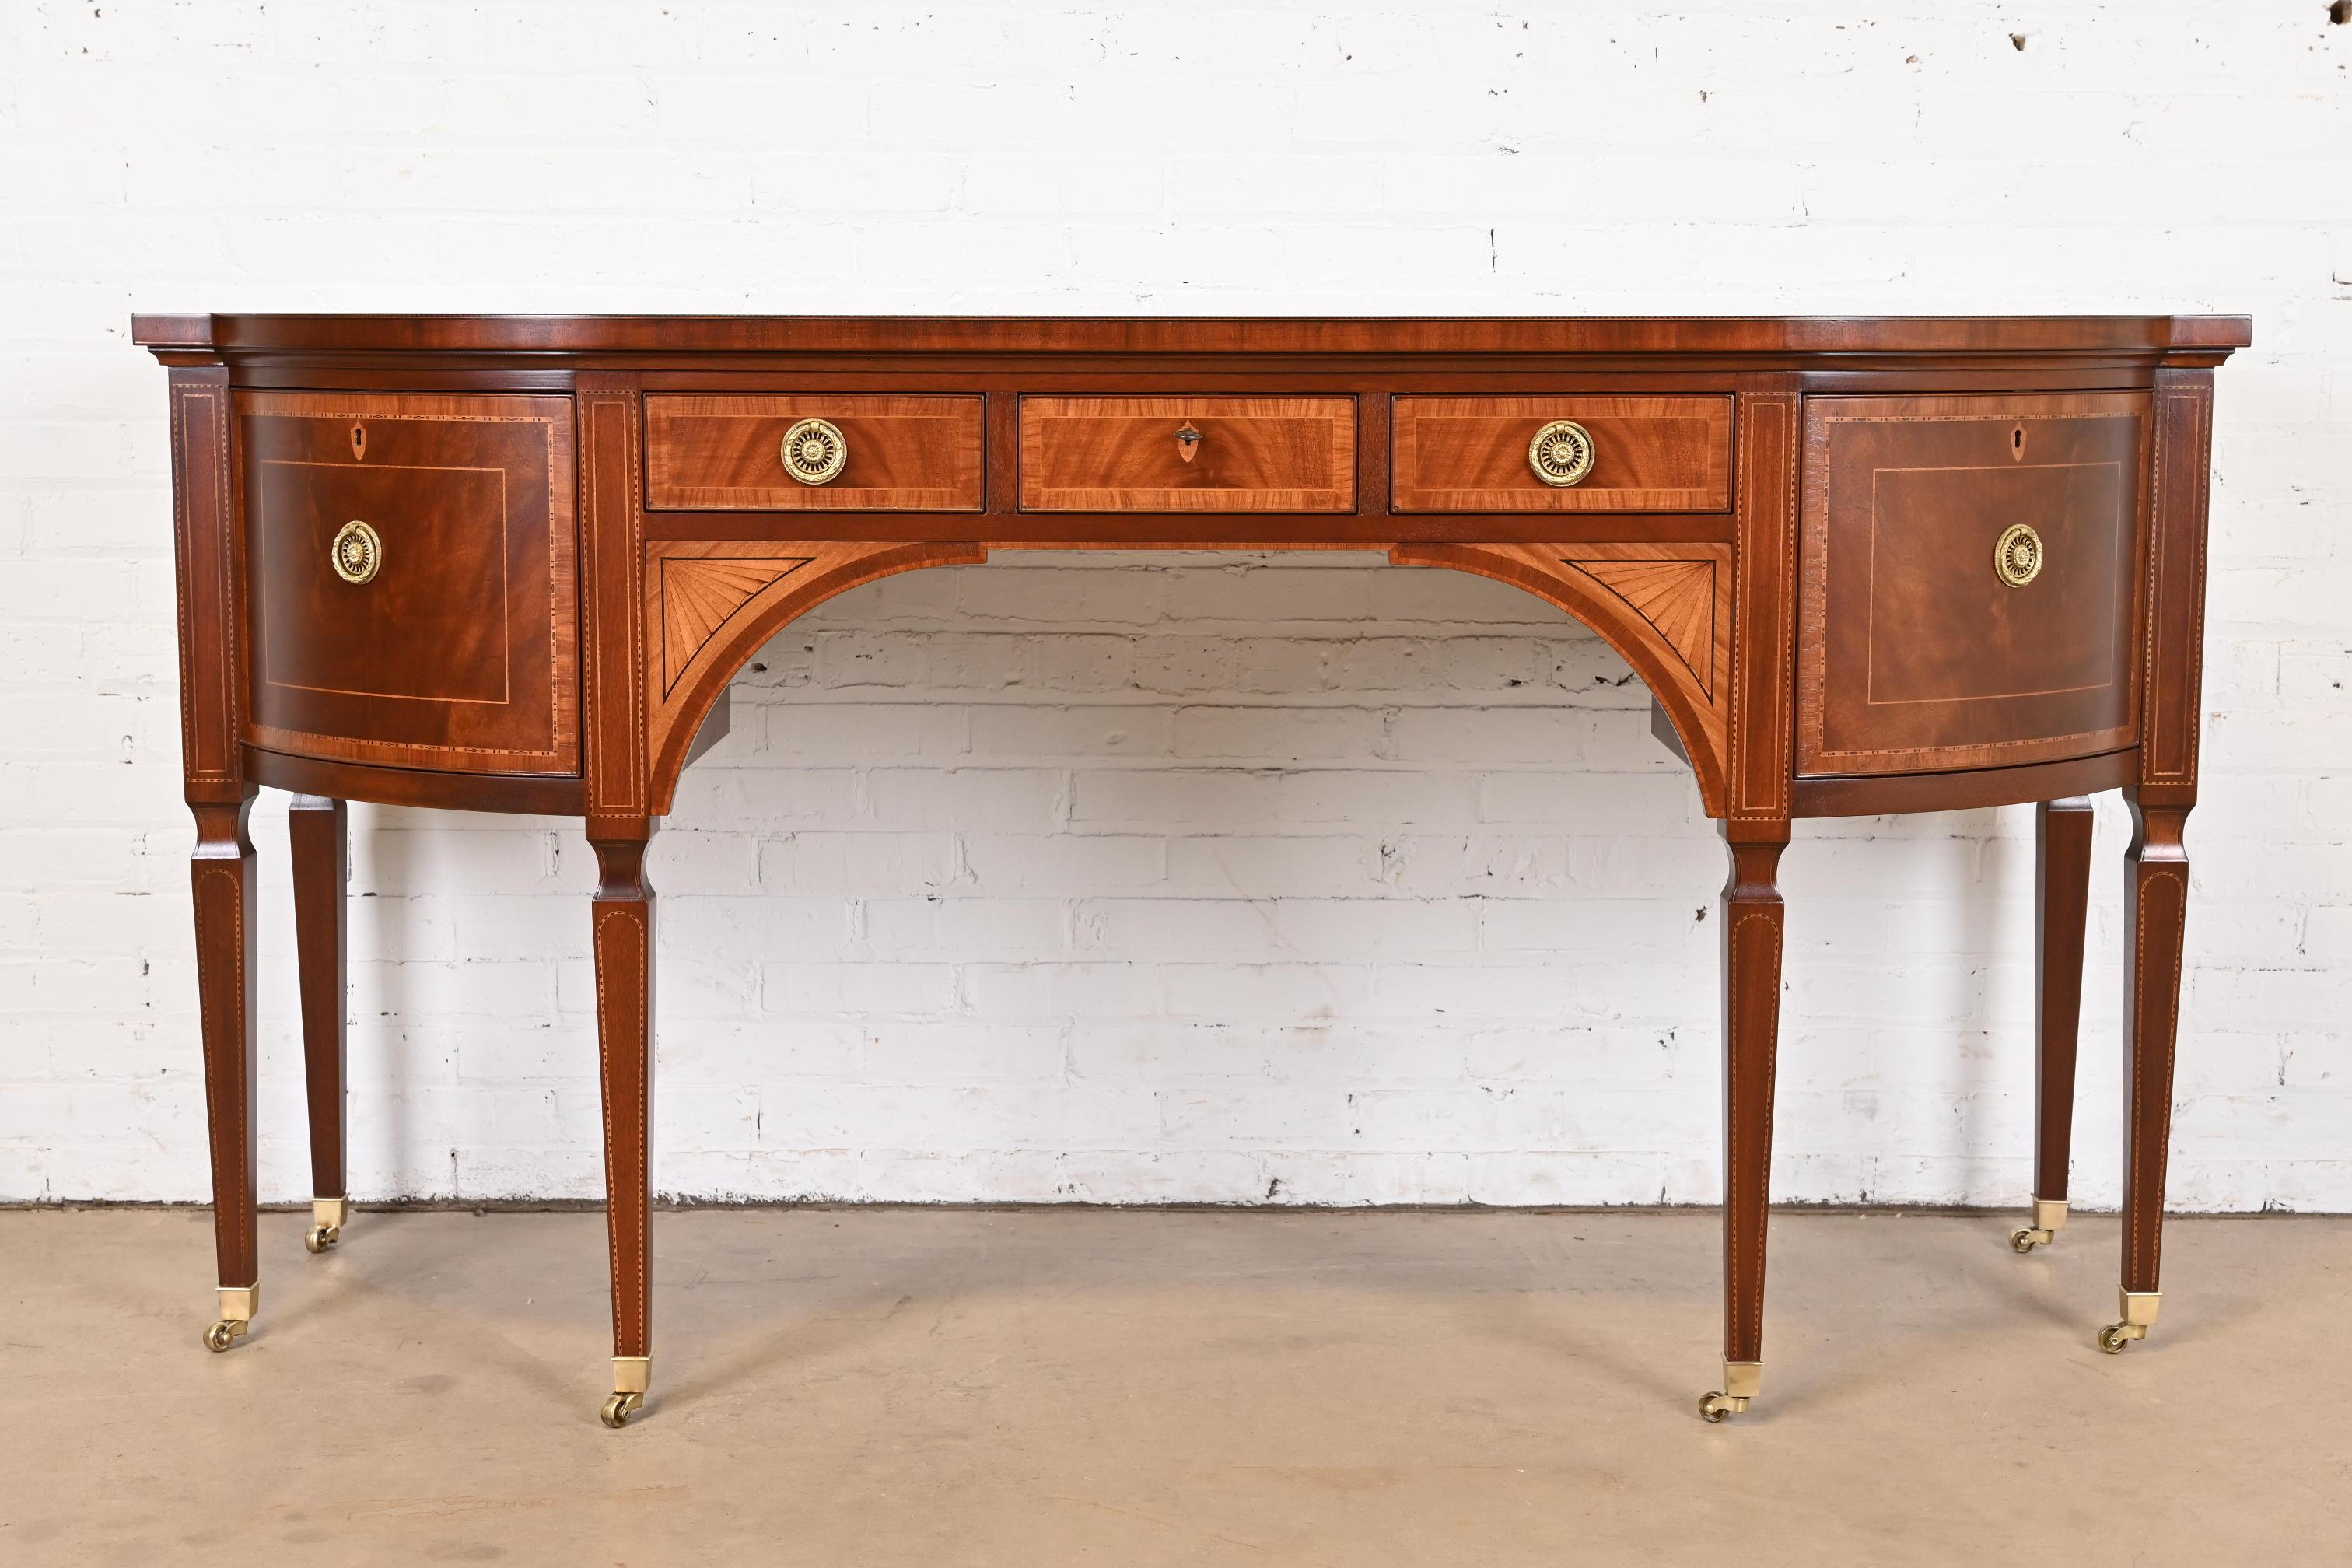 A rare and exceptional Sheraton or Hepplewhite style bow front sideboard or credenza

From the exclusive Stately Homes Collection by Baker Furniture

USA, Circa 1980s

Gorgeous flame mahogany, with satinwood inlay, original brass hardware, and